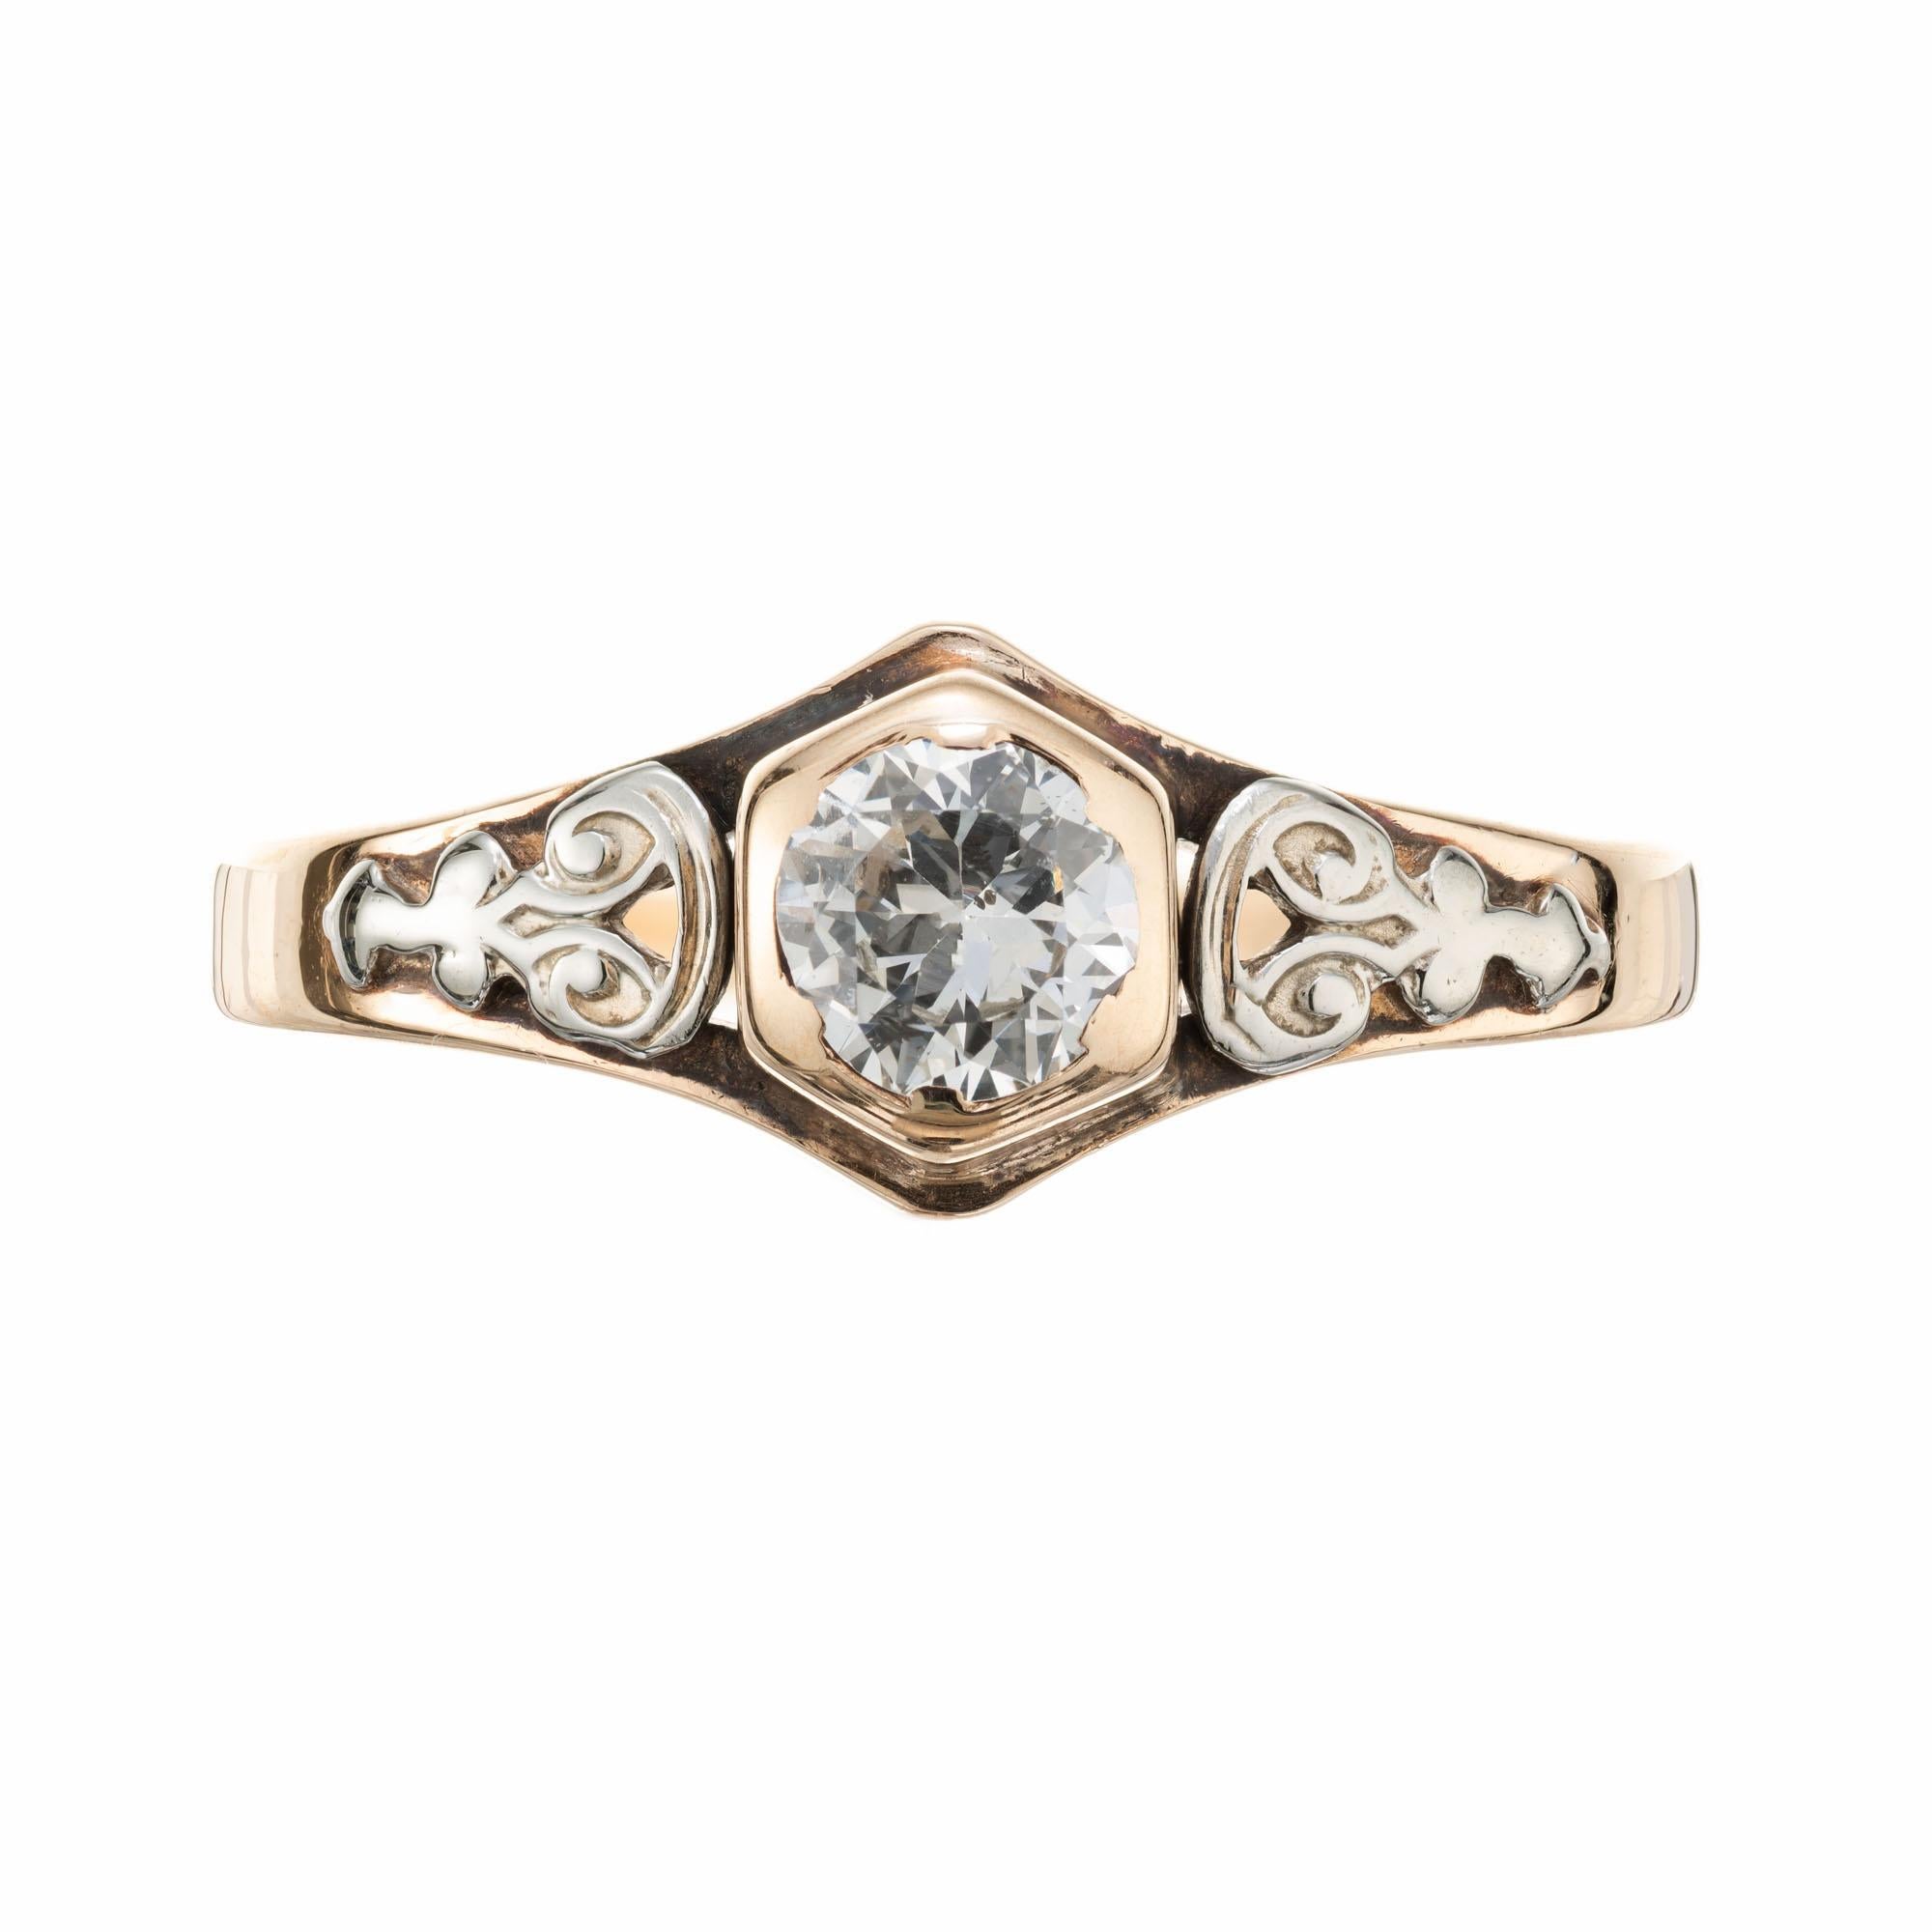 Handmade 1920's Art Deco diamond engagement ring.  Open work 14k yellow gold setting with ring with white gold accents and a .40ct Ole European cut center stone. engraved 12-25-25. 

1 Old European cut diamond, F SI approx. .40cts
Size 6.25 and